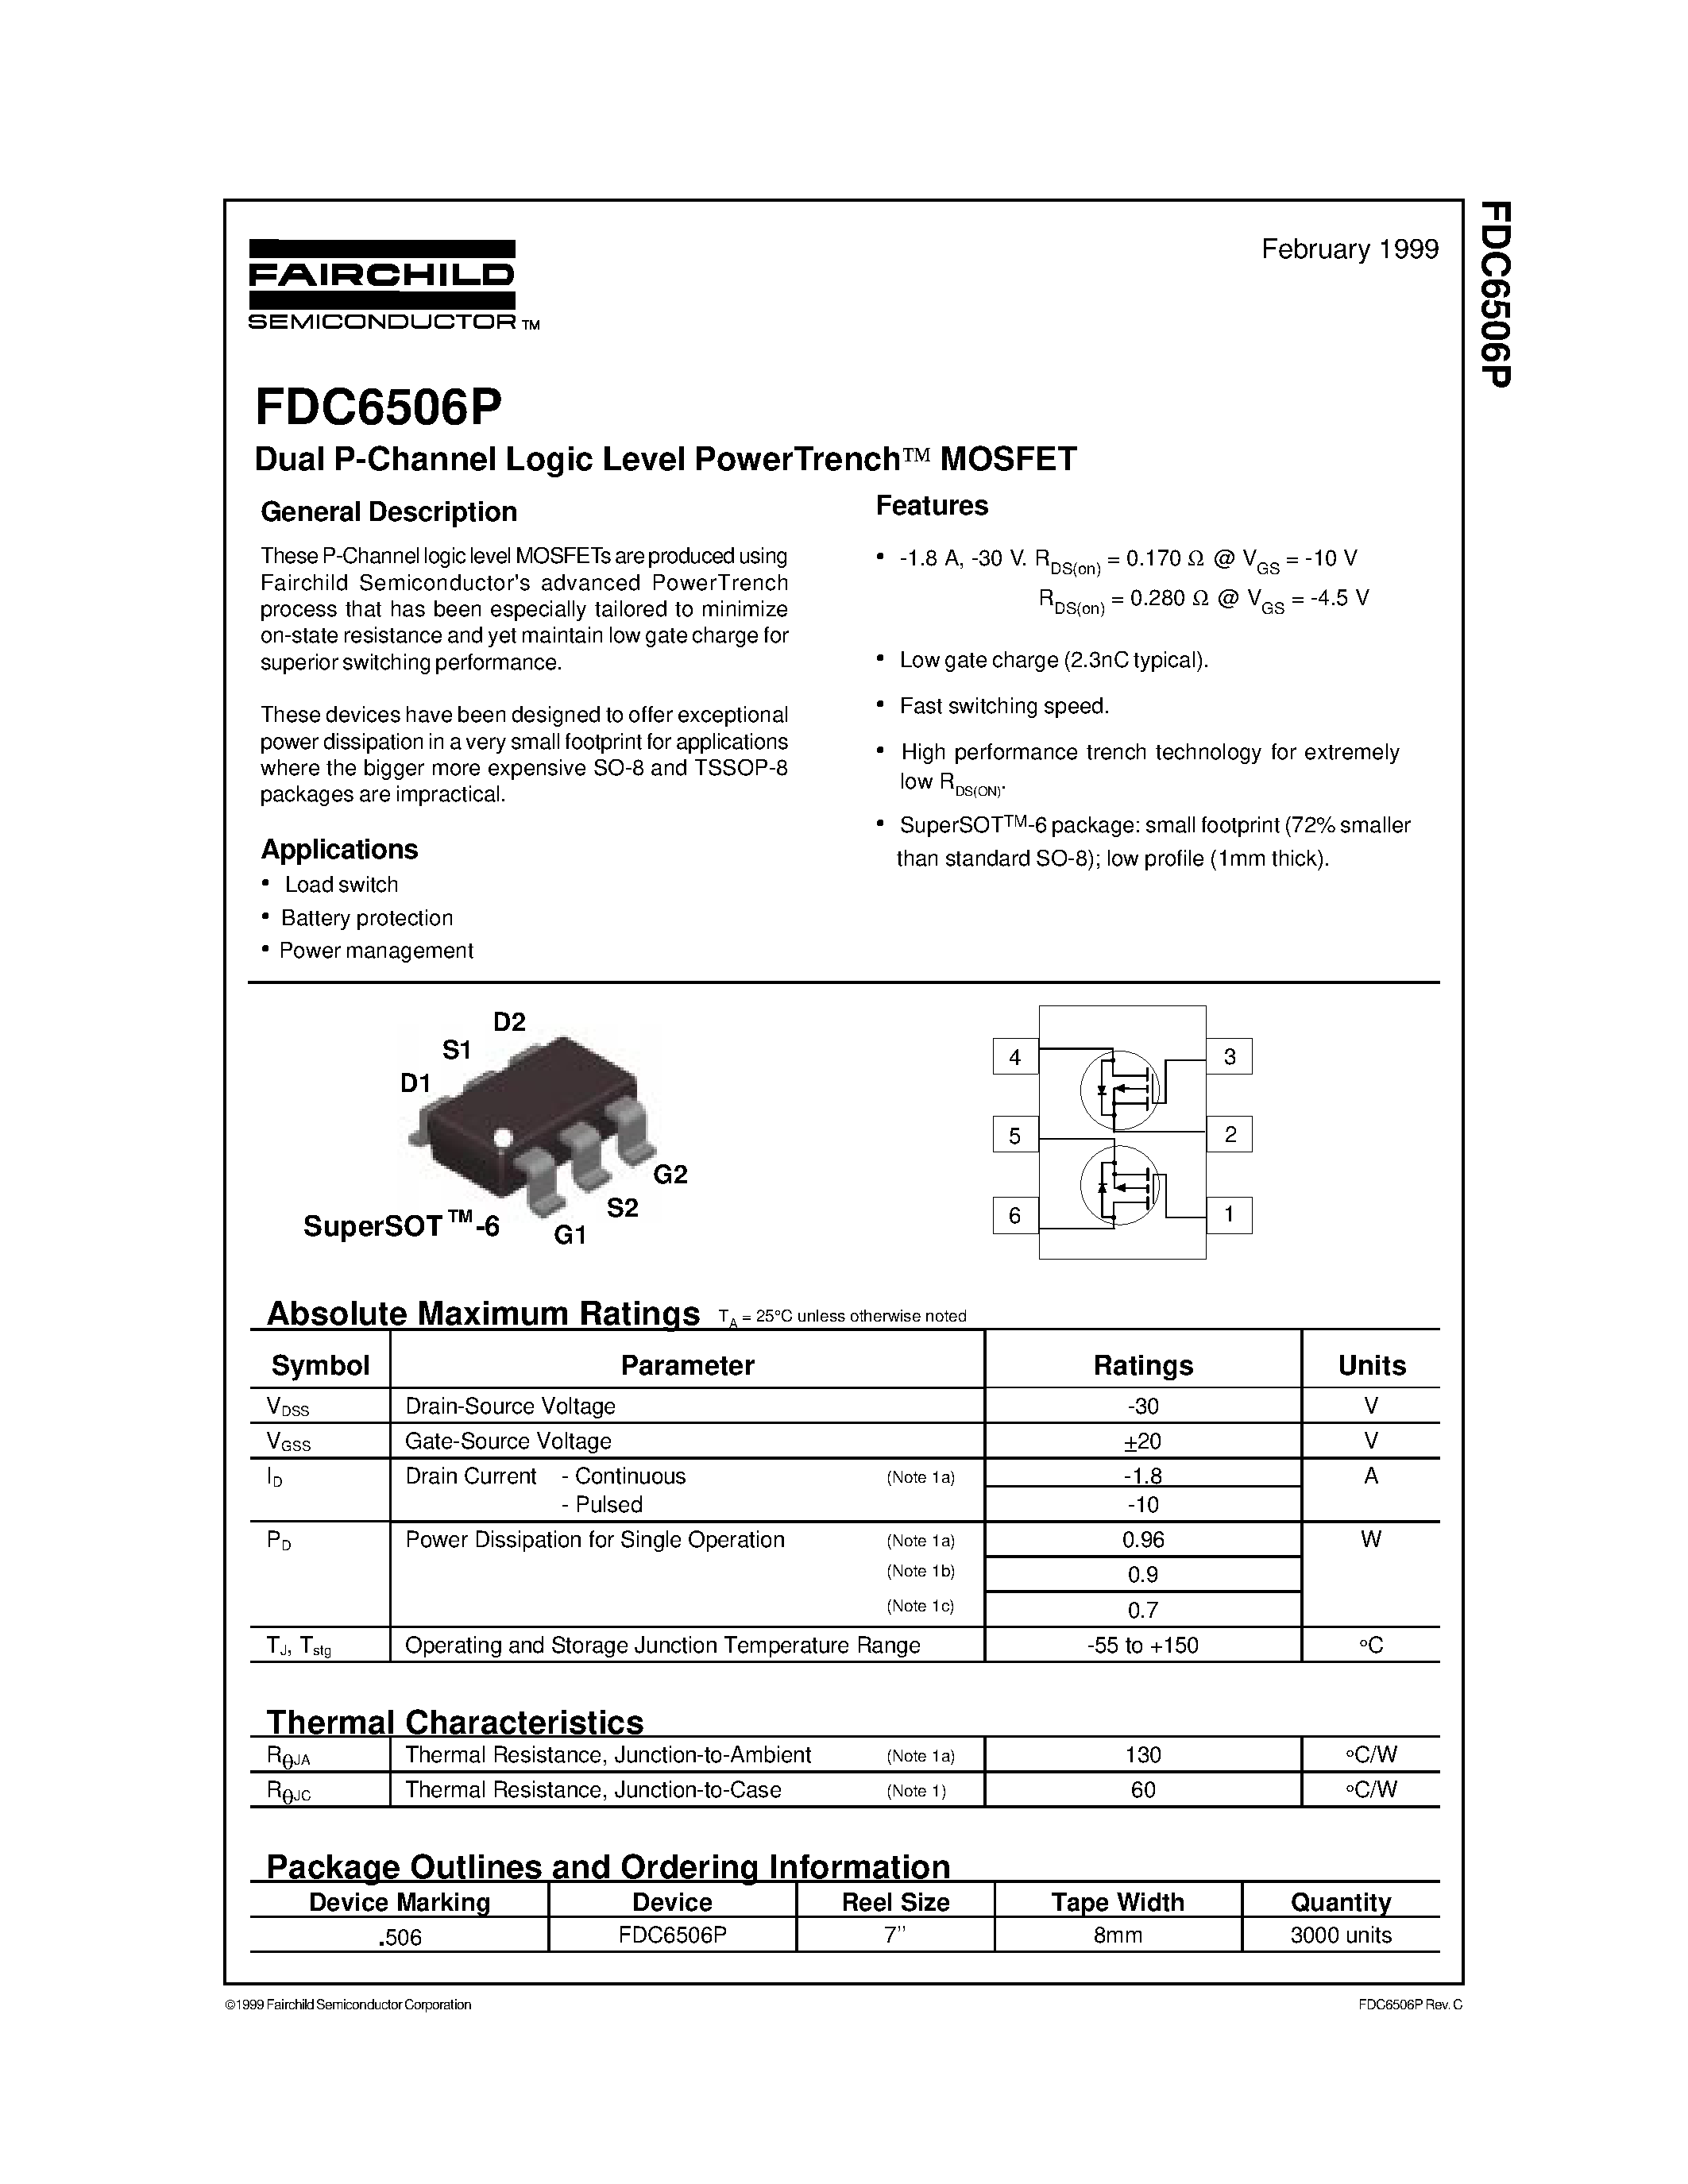 Datasheet FDC6506 - Dual P-Channel Logic Level PowerTrench MOSFET page 1